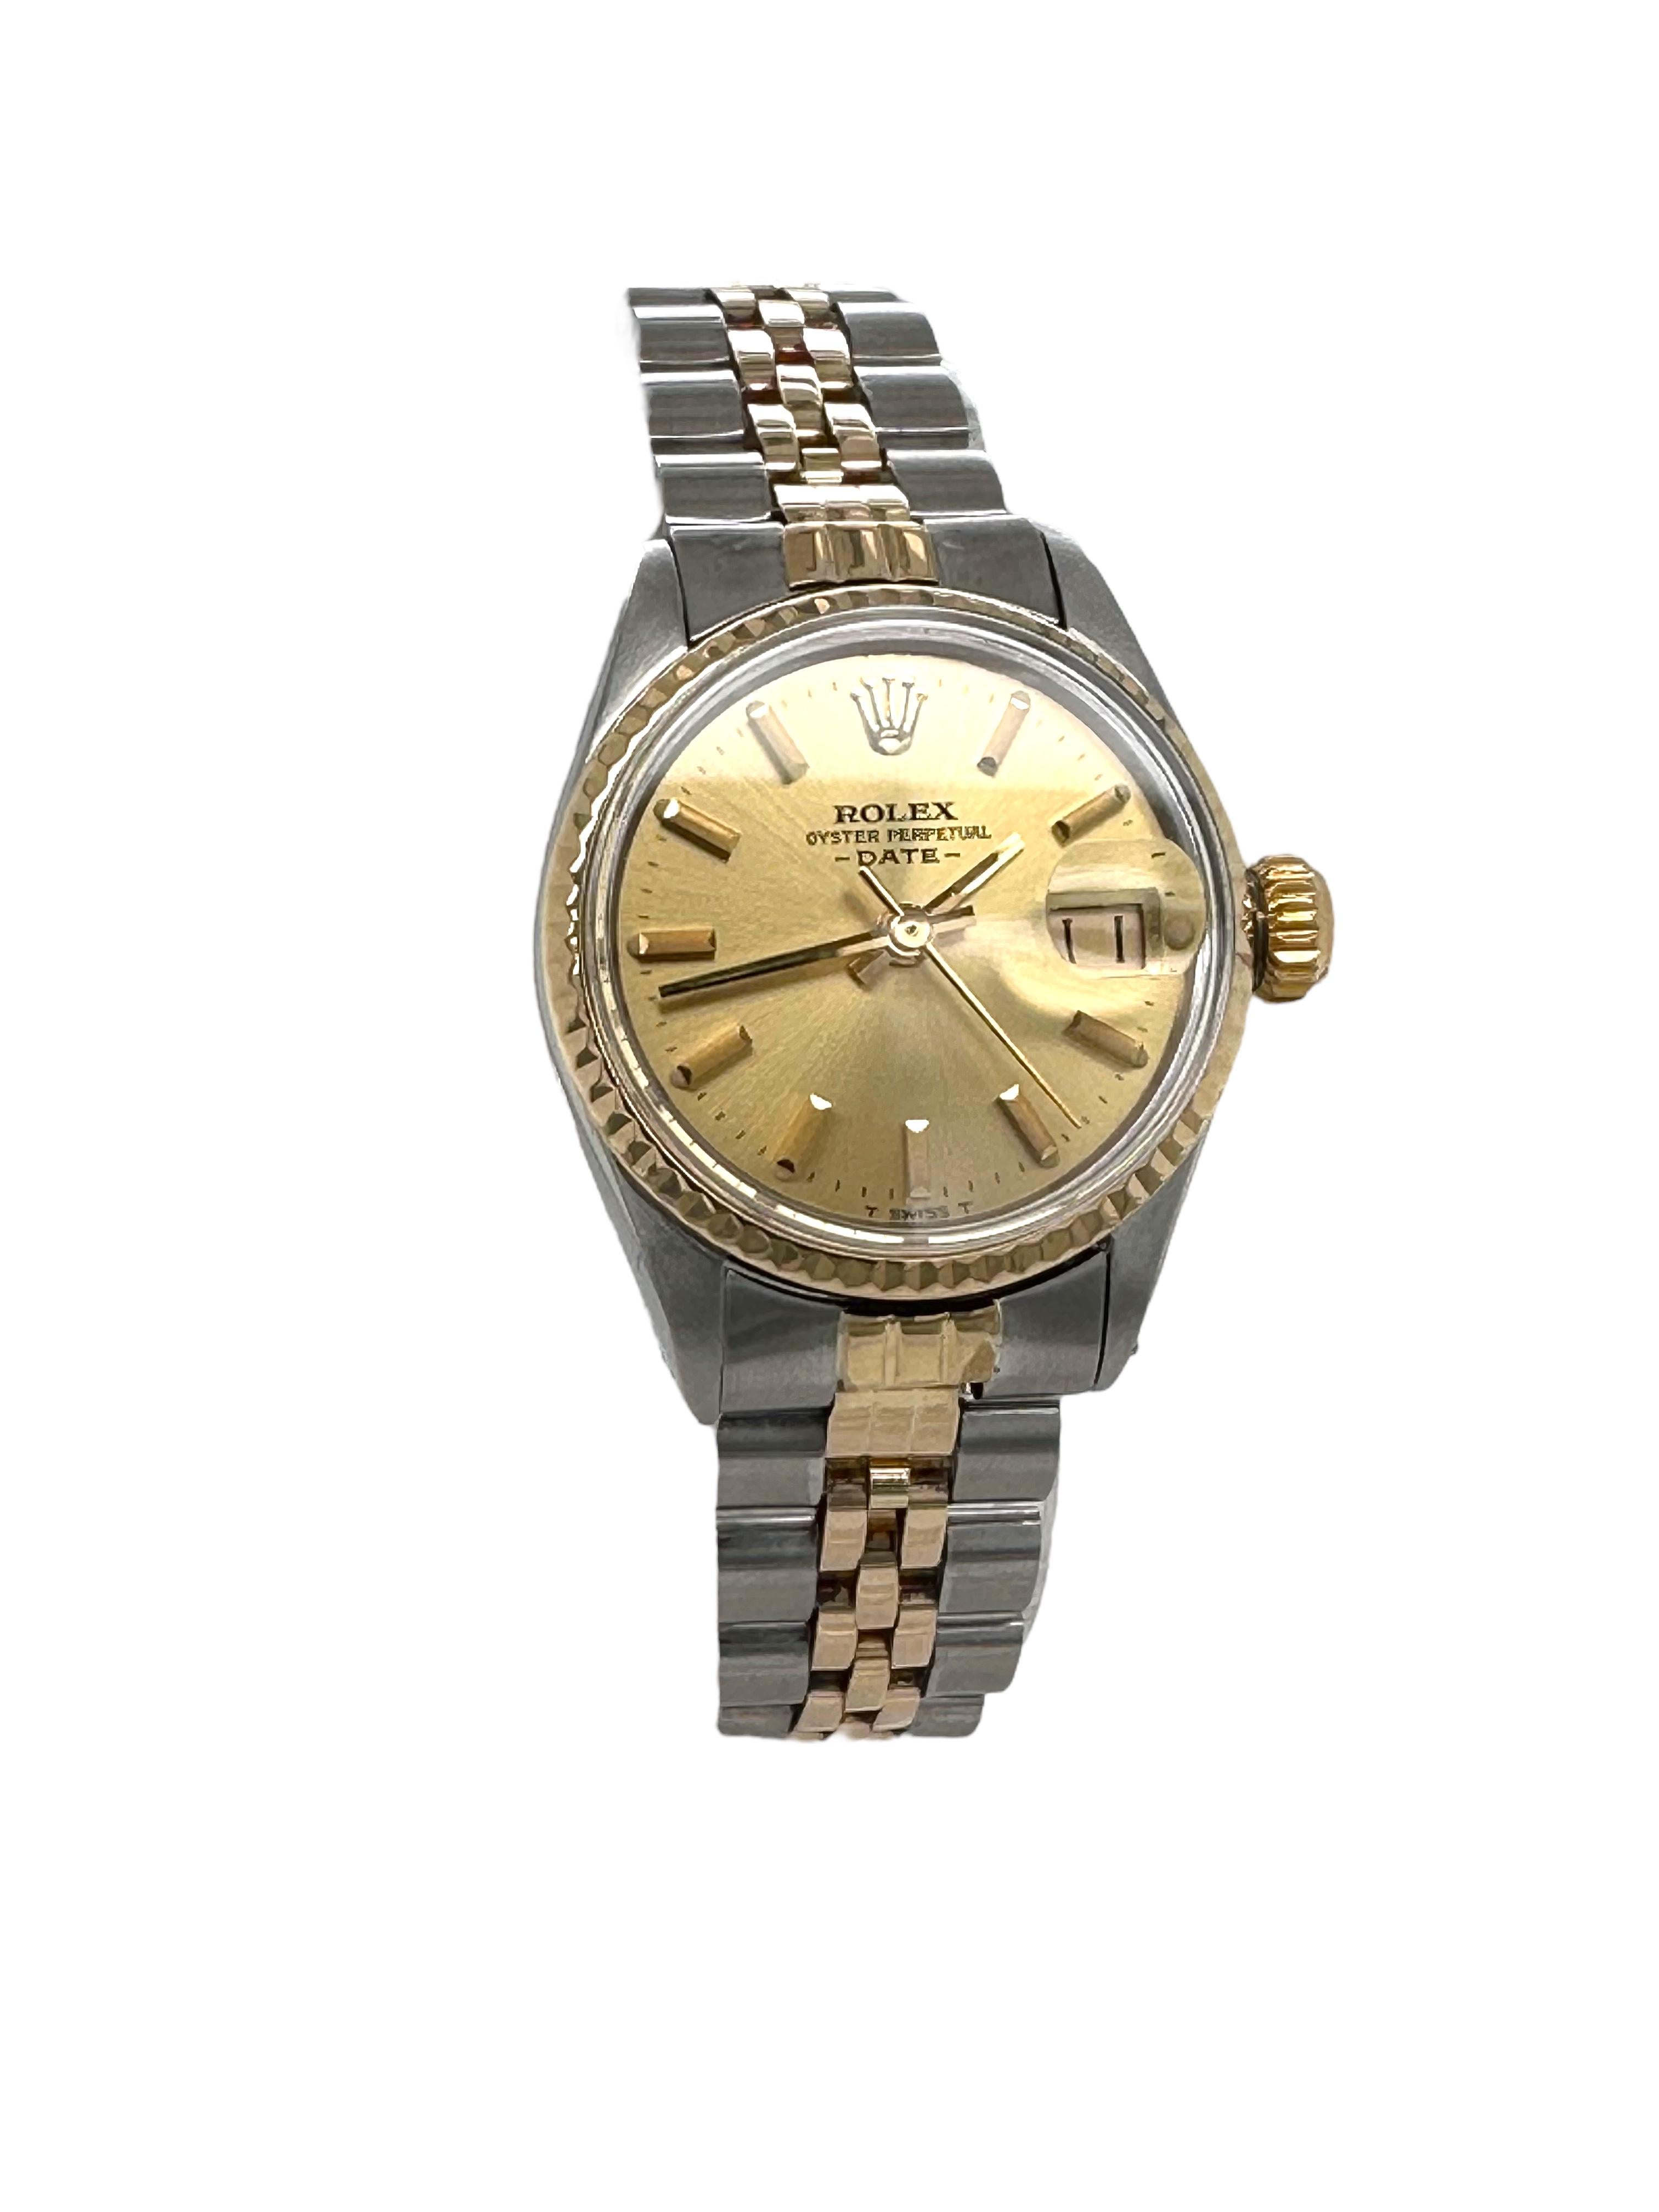 Artisan Rolex Oyster Date Ladies Bi Color Ref 6517 Automatic For Sale